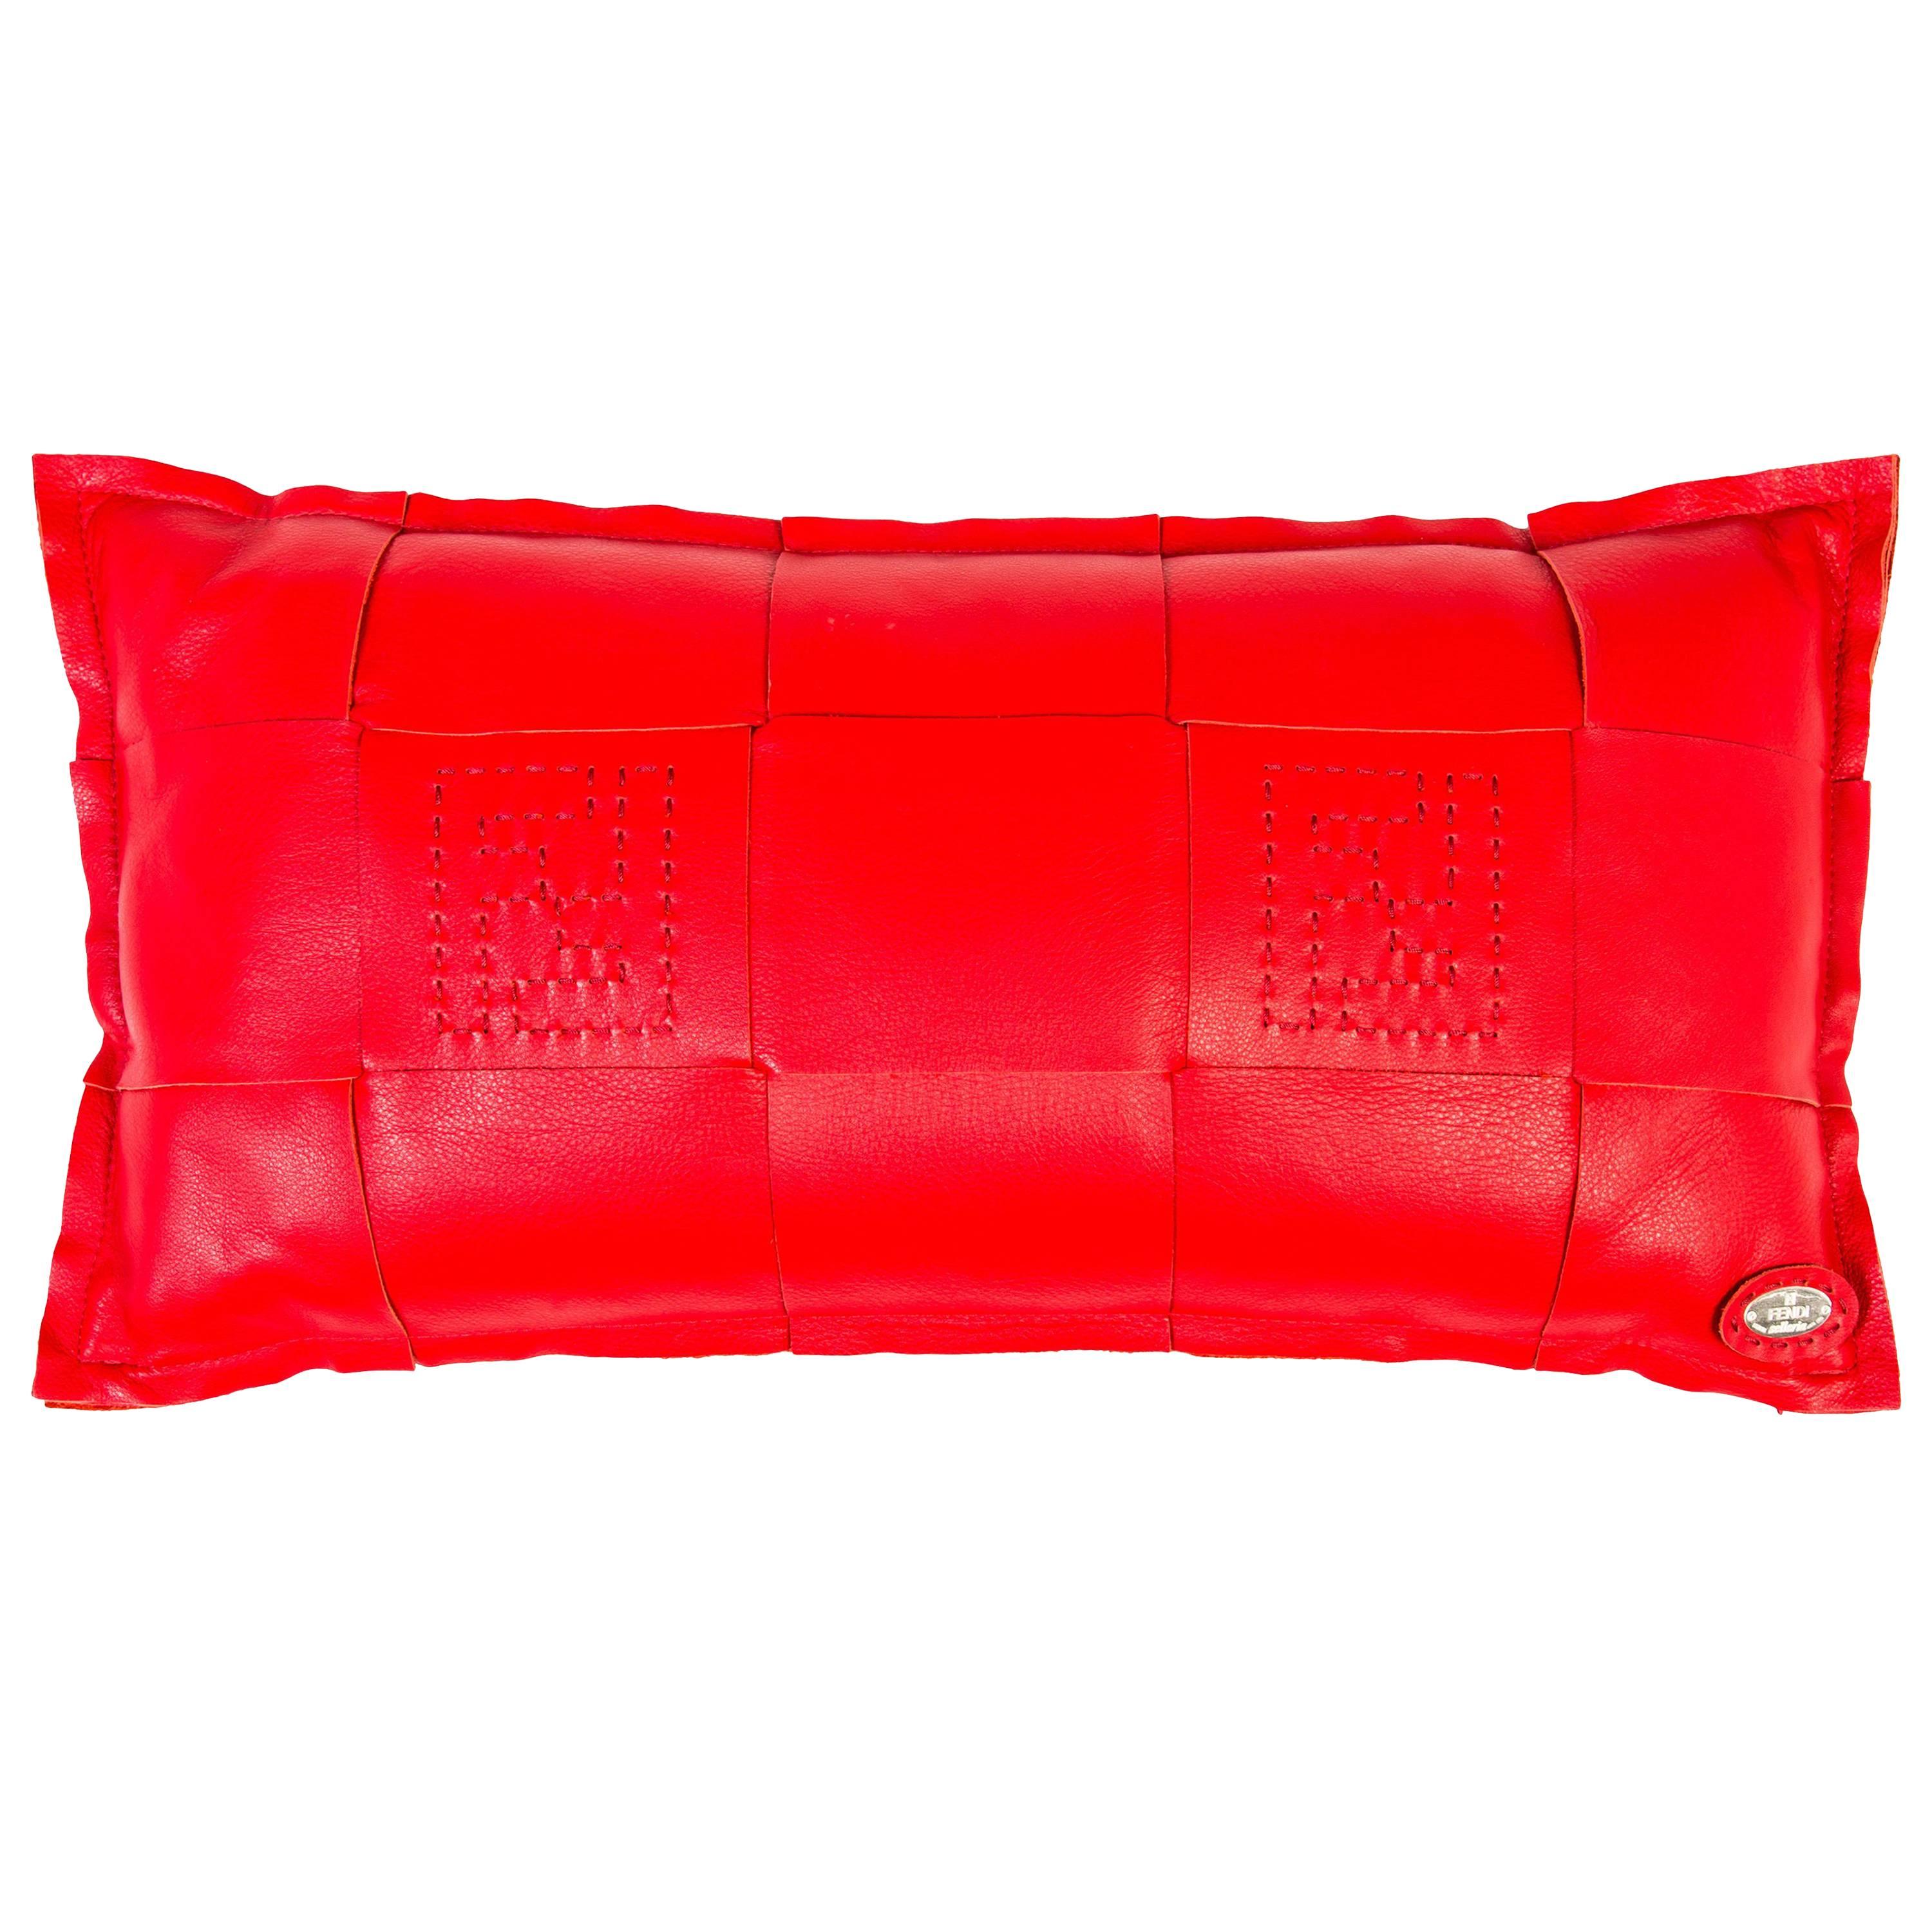 Fendi Red Leather Logo Home Decorative Couch Chair Throw Pillow